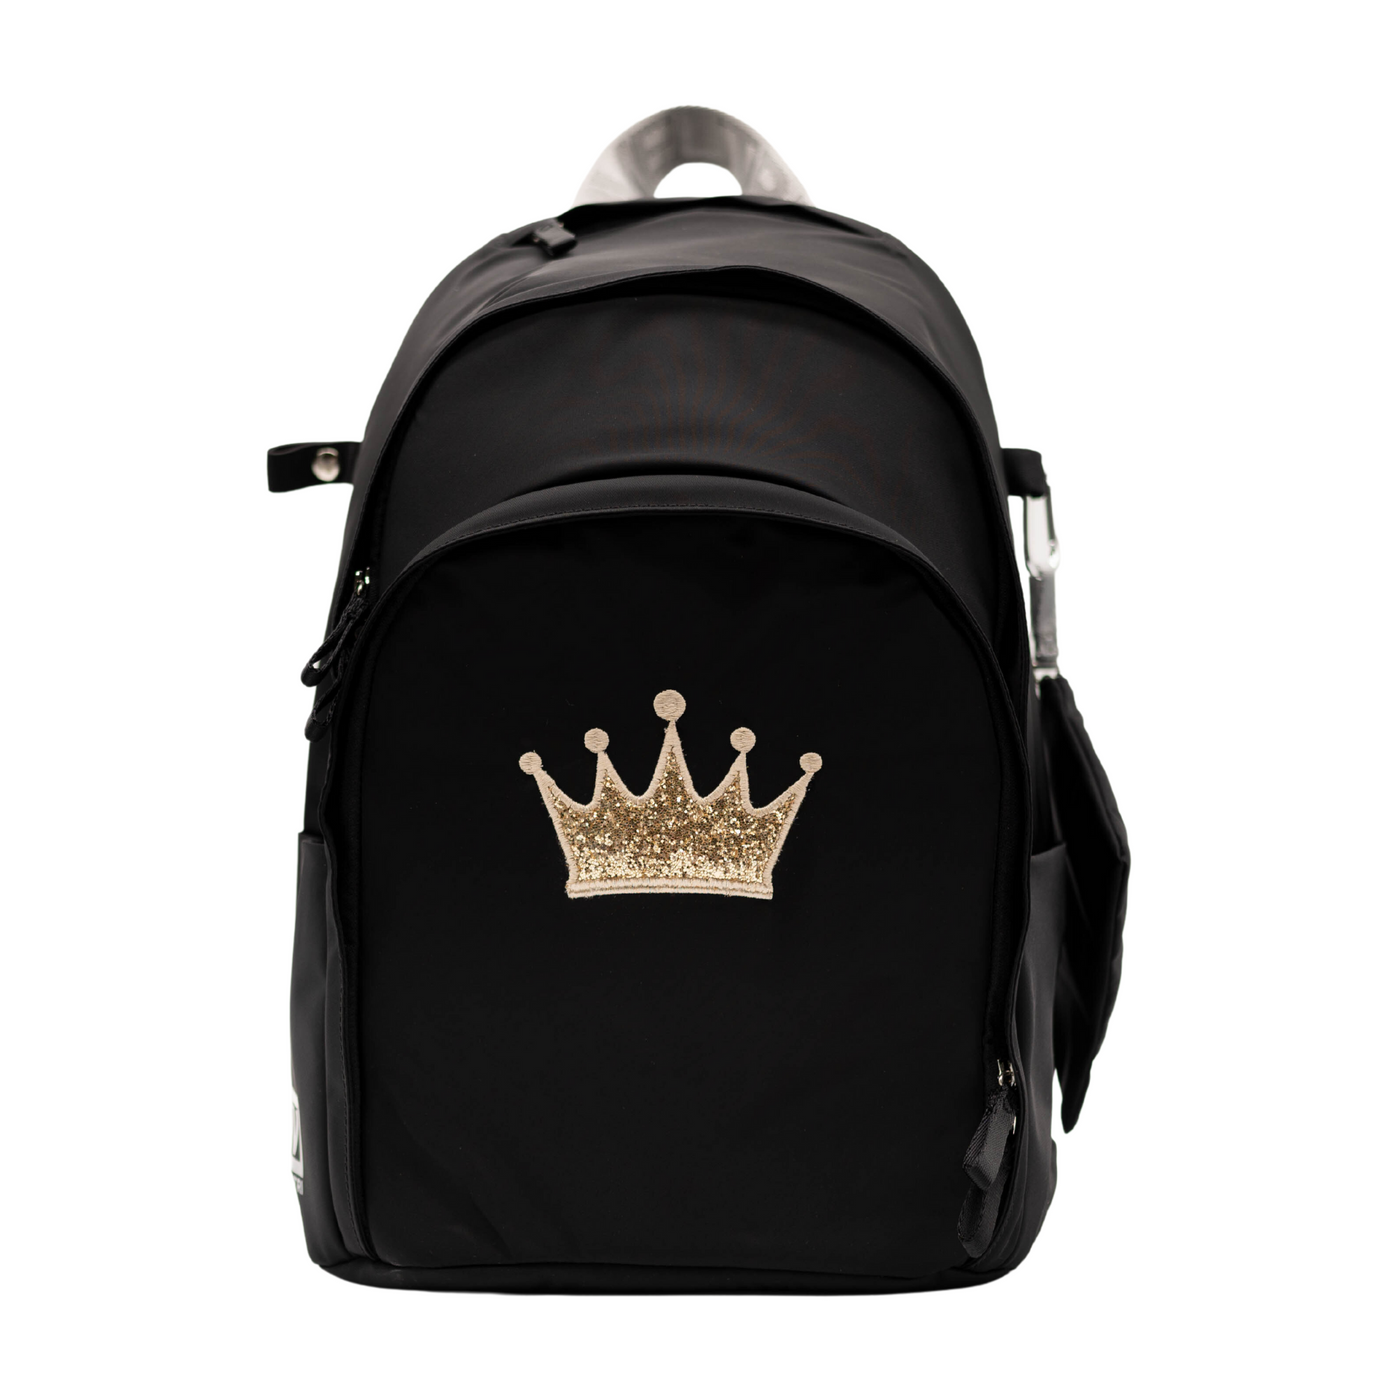 Novelty Delaire Backpack - New! “Crown” (custom embroidered - allow an additional 5 business days to ship)